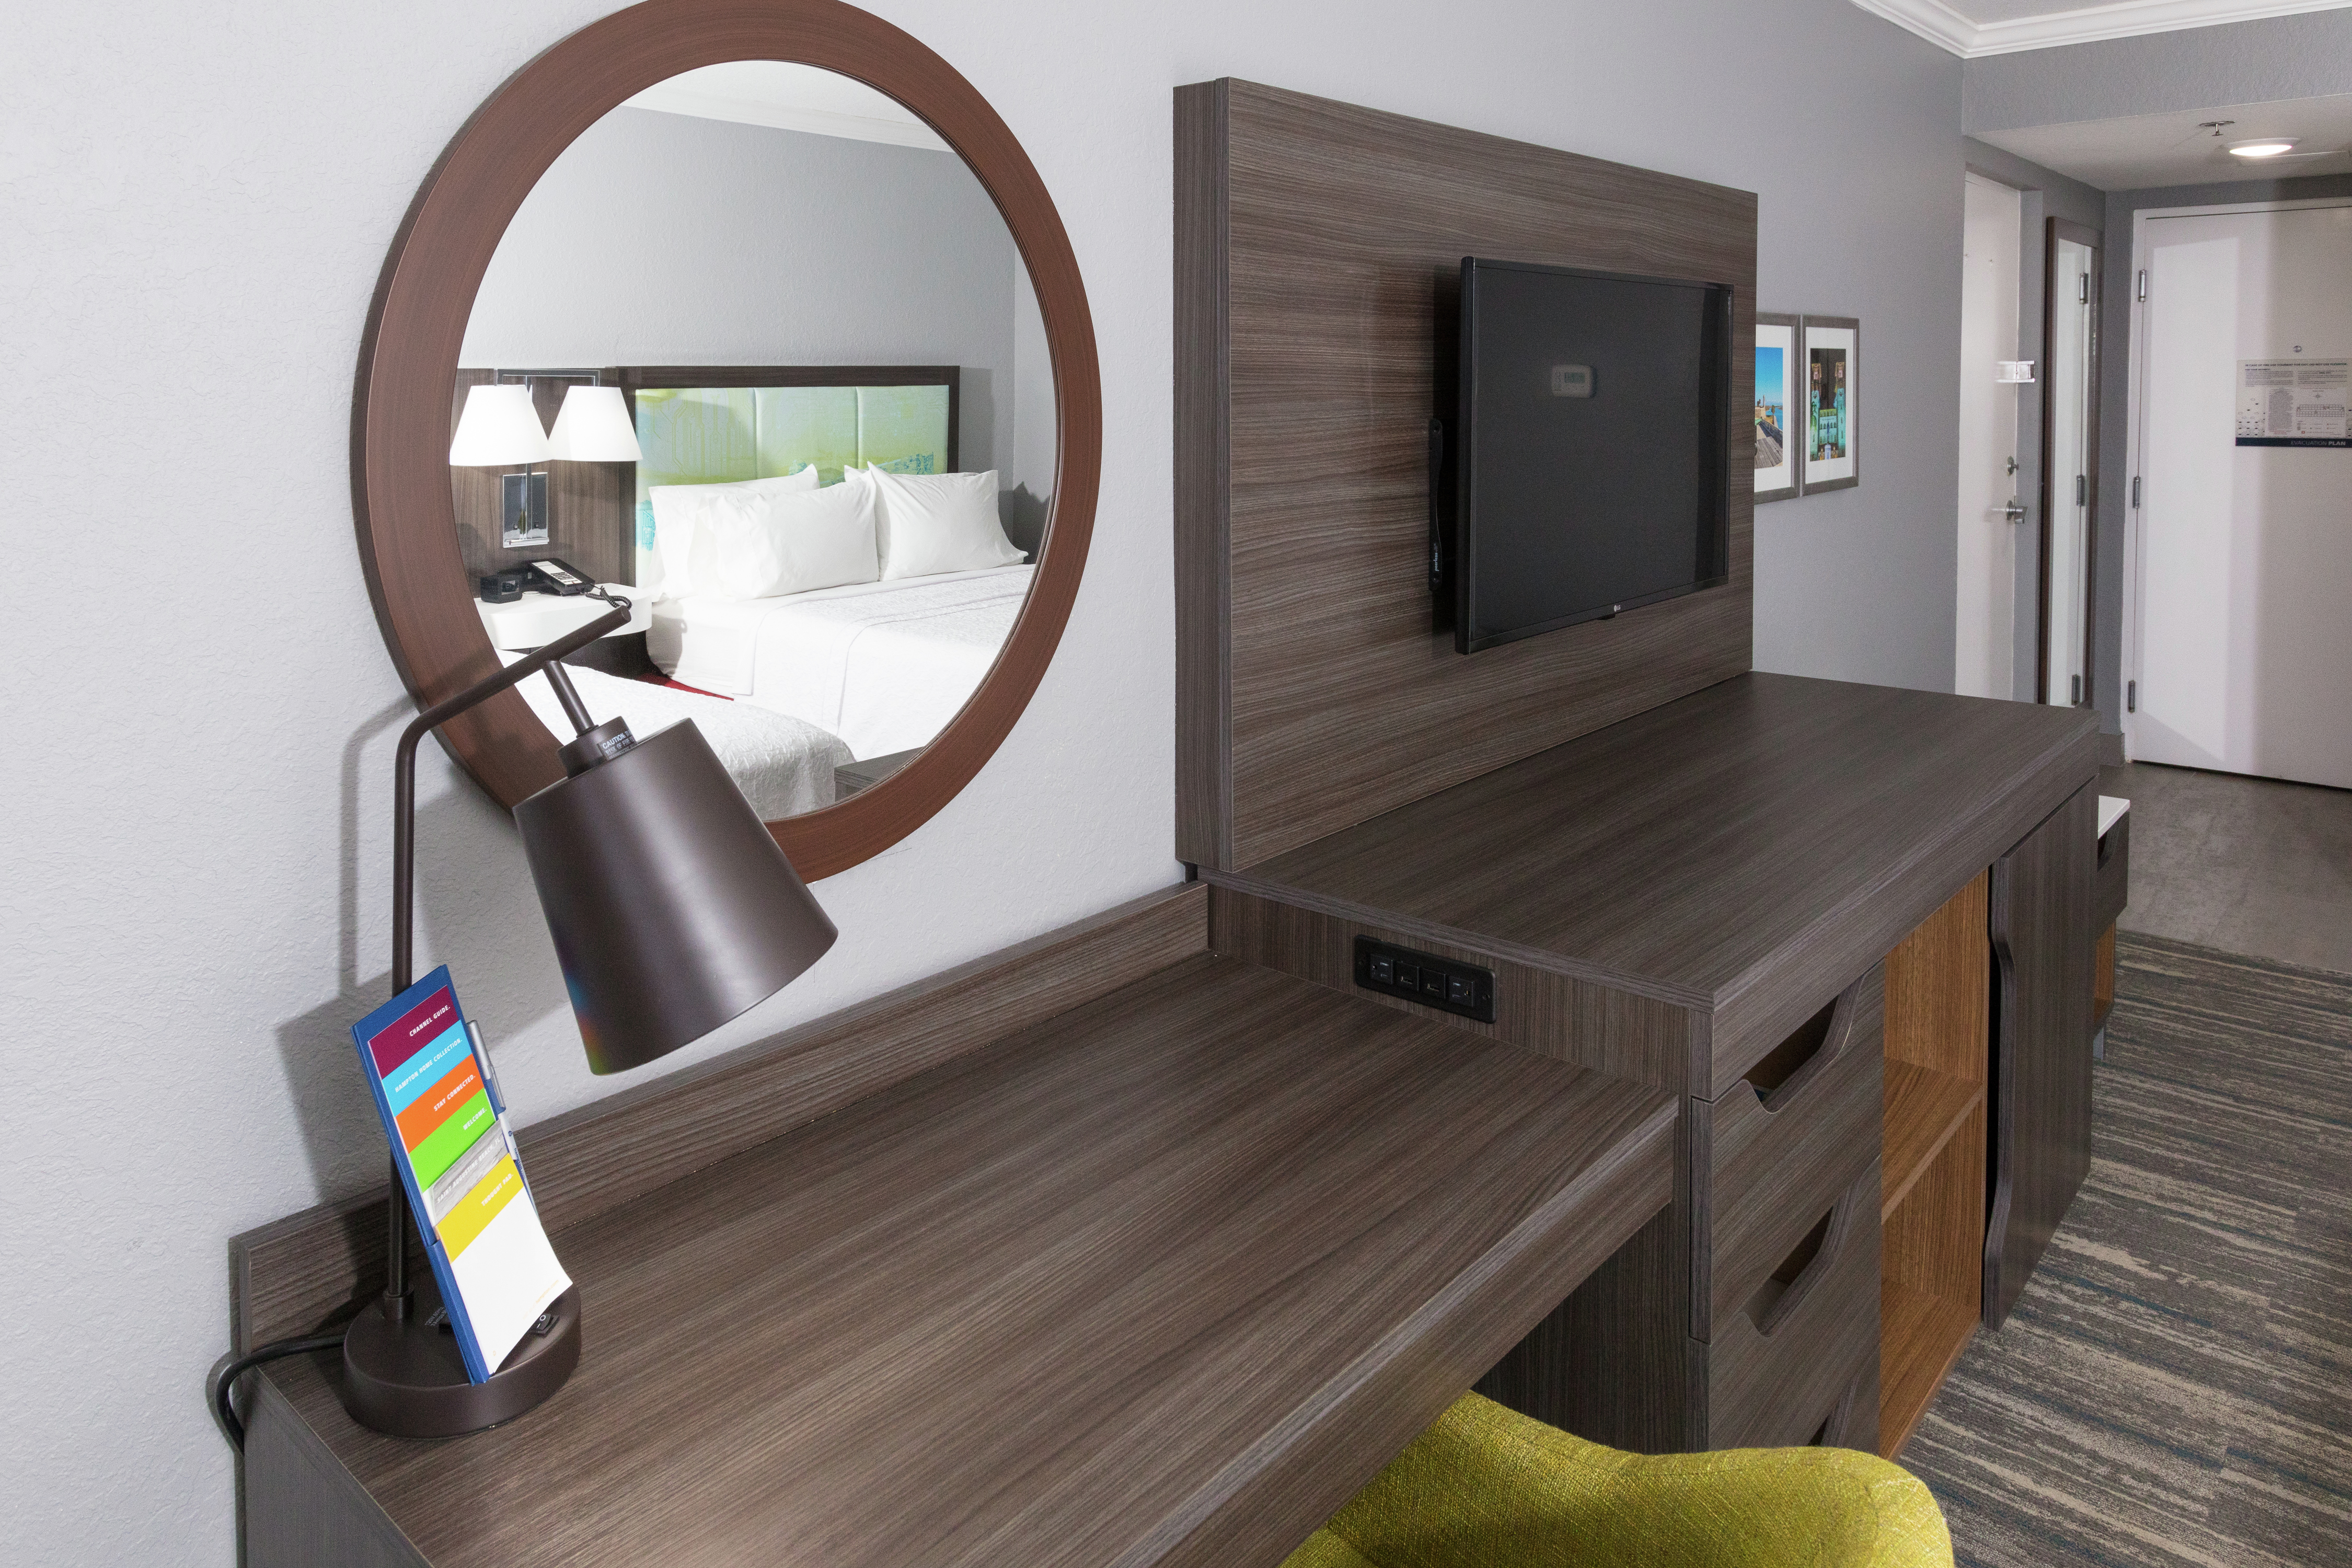 Bed Reflected in Round Wall Mirror Above Work Desk Next to Flat Screen TV in Guest Room